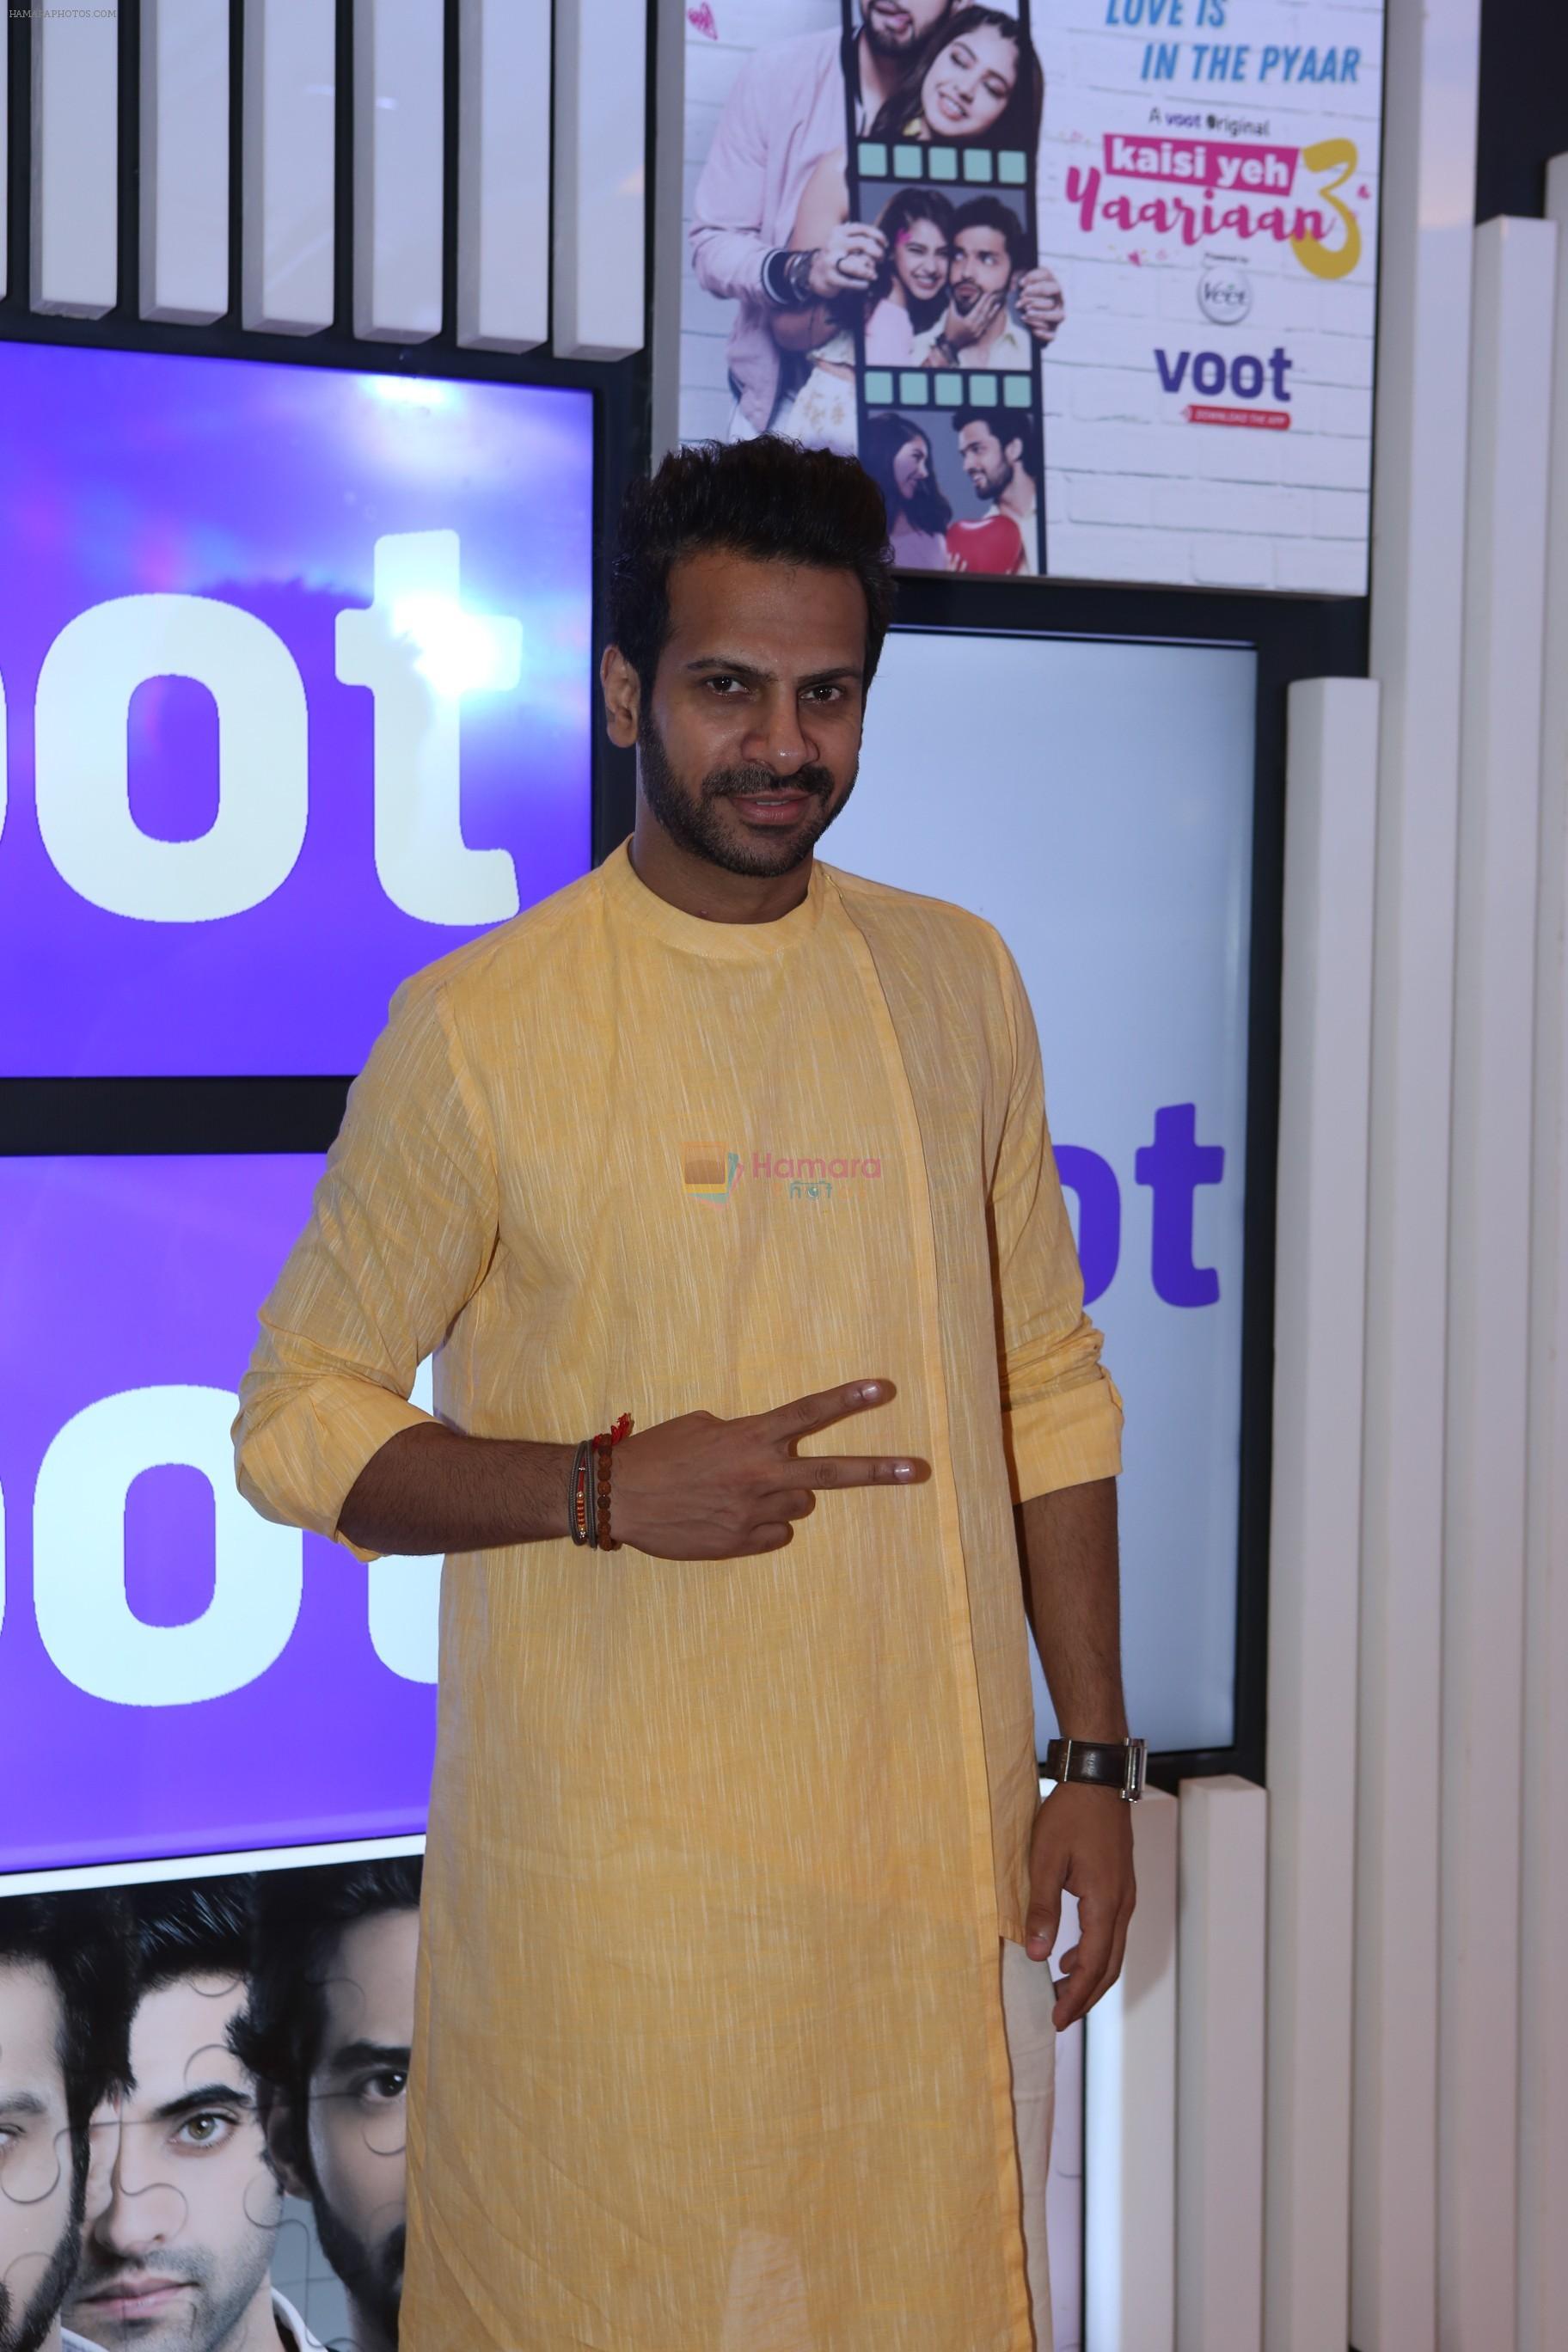 at Voot press conference in ITC Grand Maratha, Andheri on 30th AUg 2018